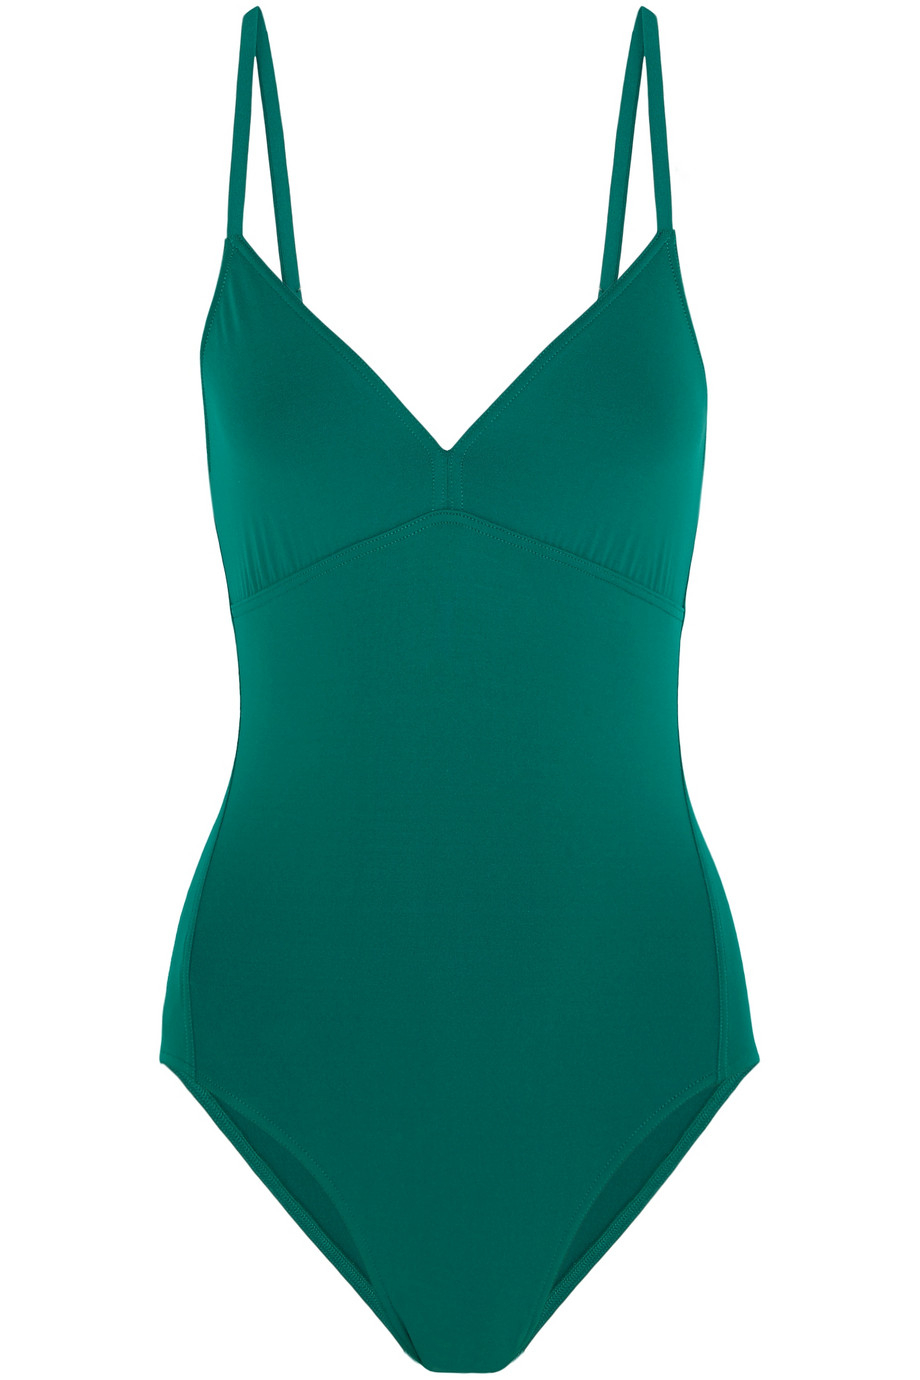 Eres Les Essentiels Complot Swimsuit in Green | Lyst